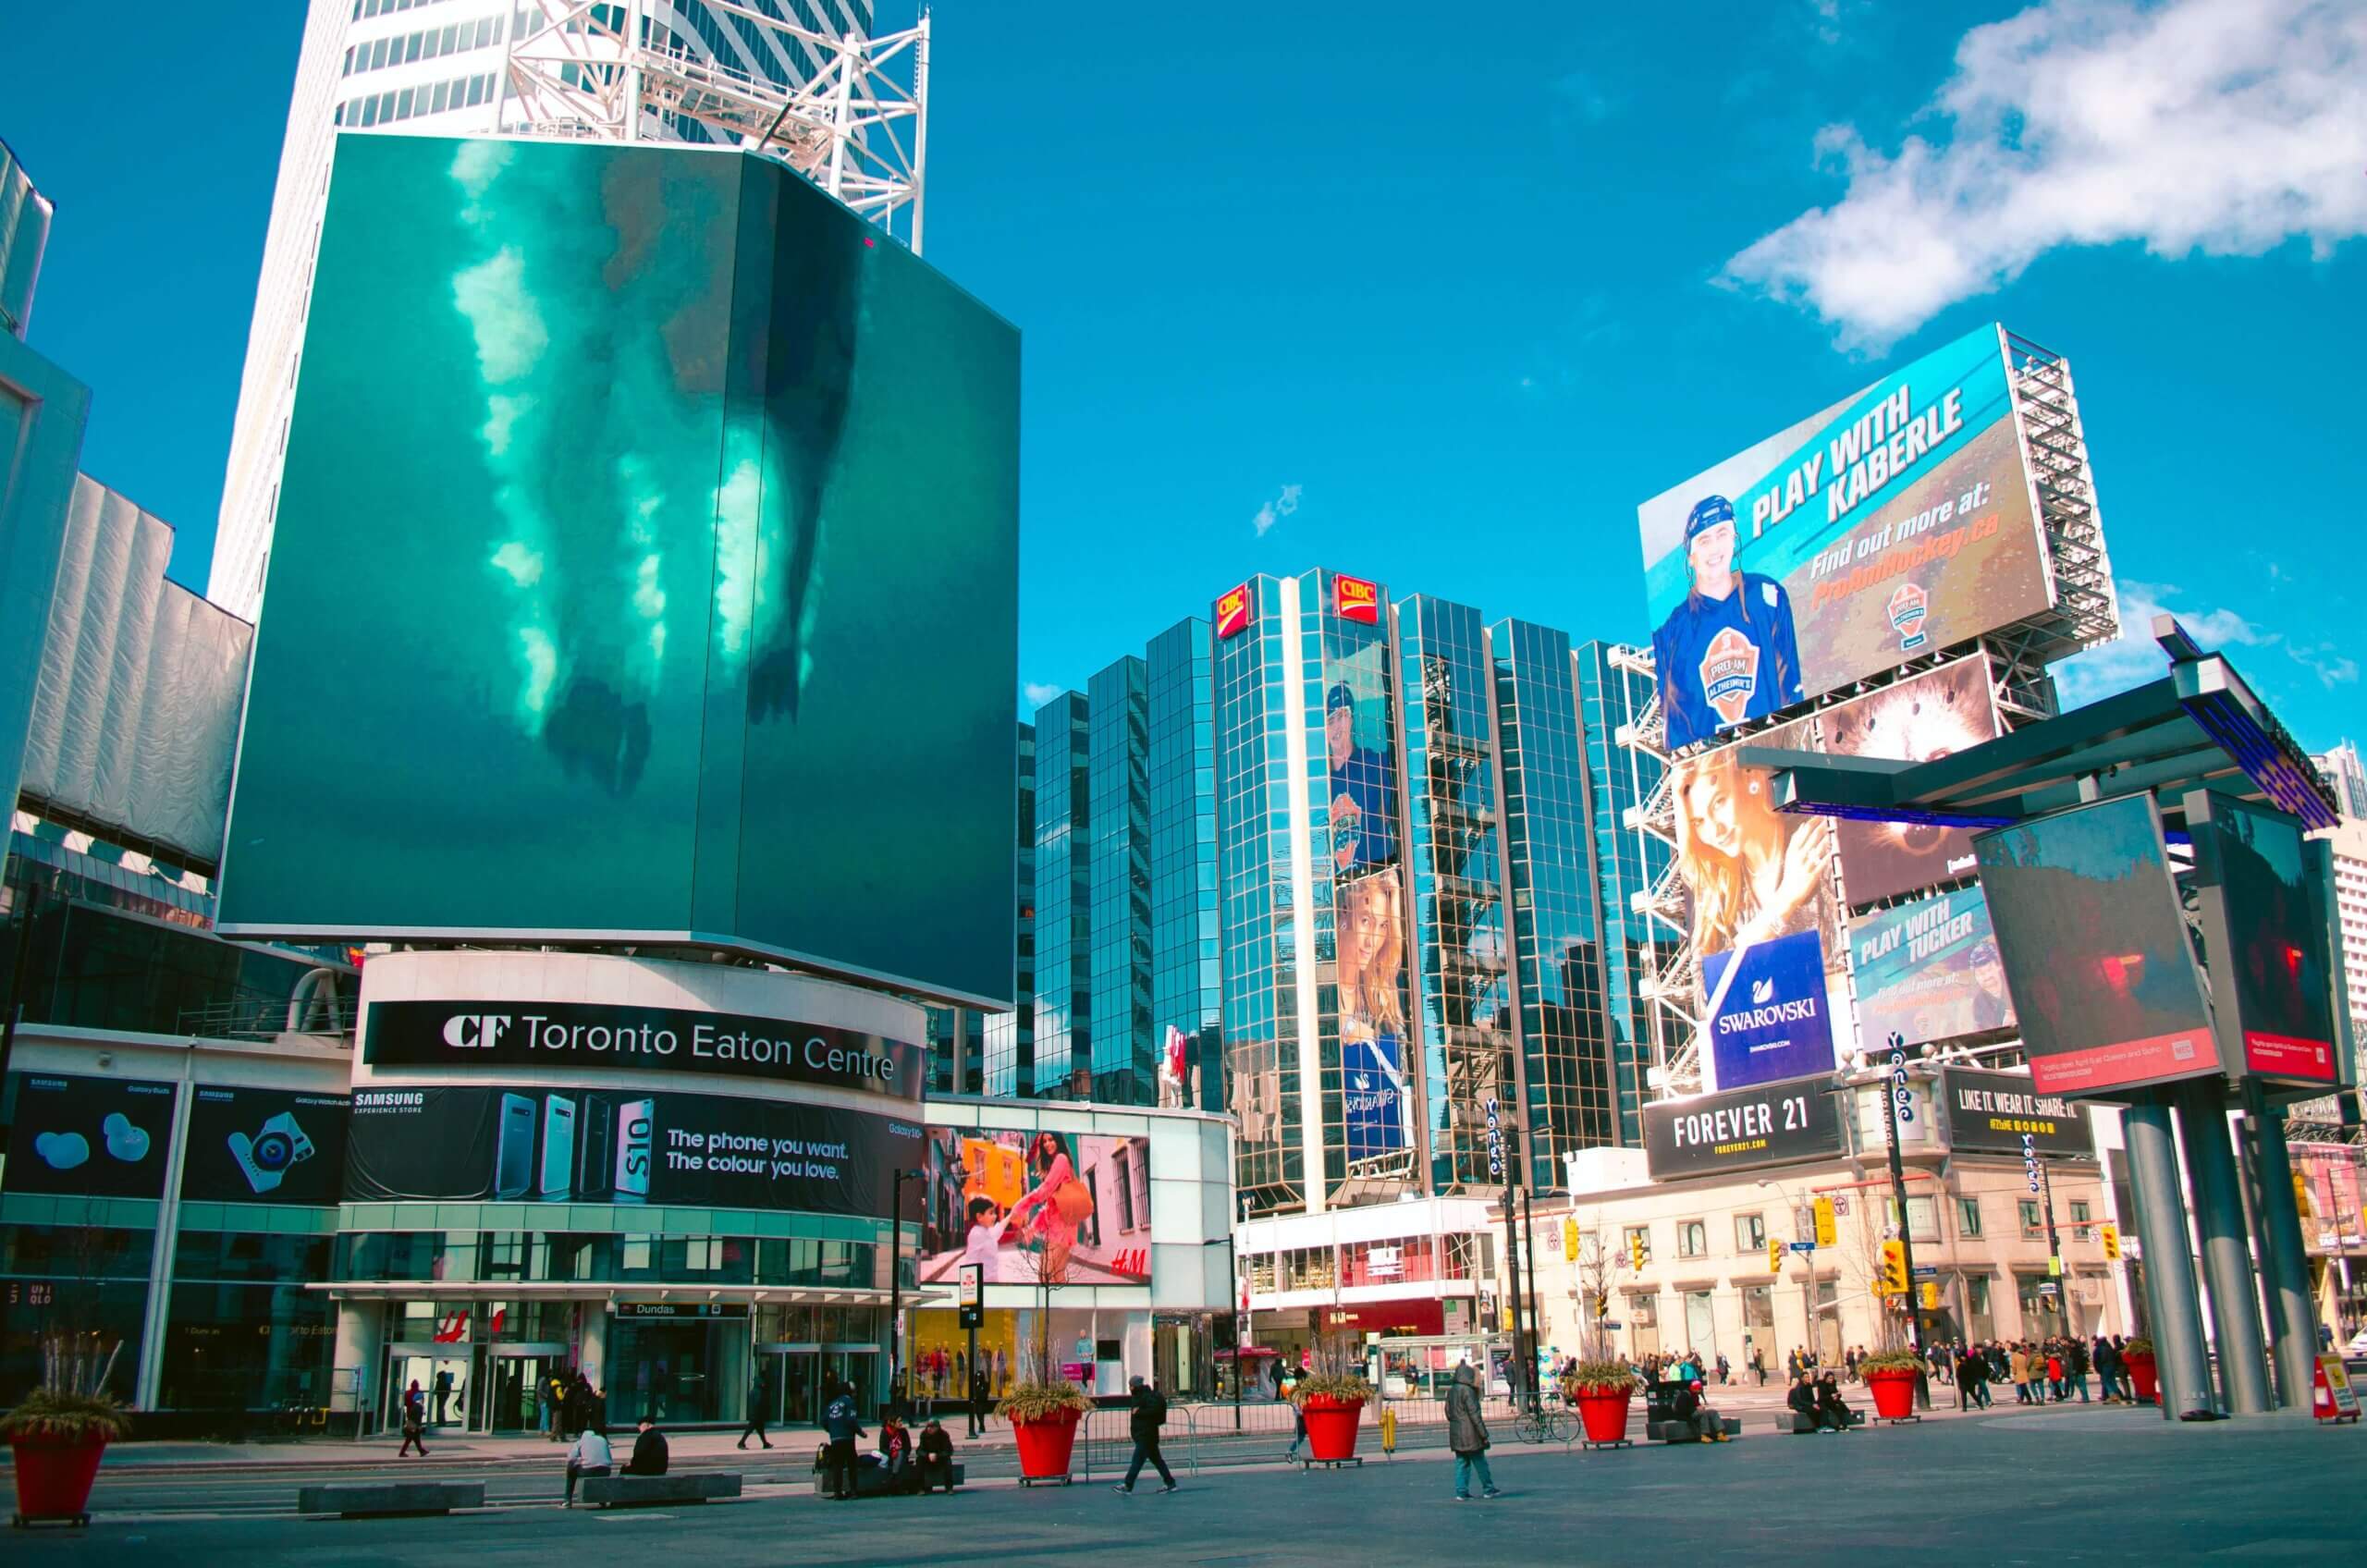 Large-scale digital out-of-home ads in Toronto's Dundas Square